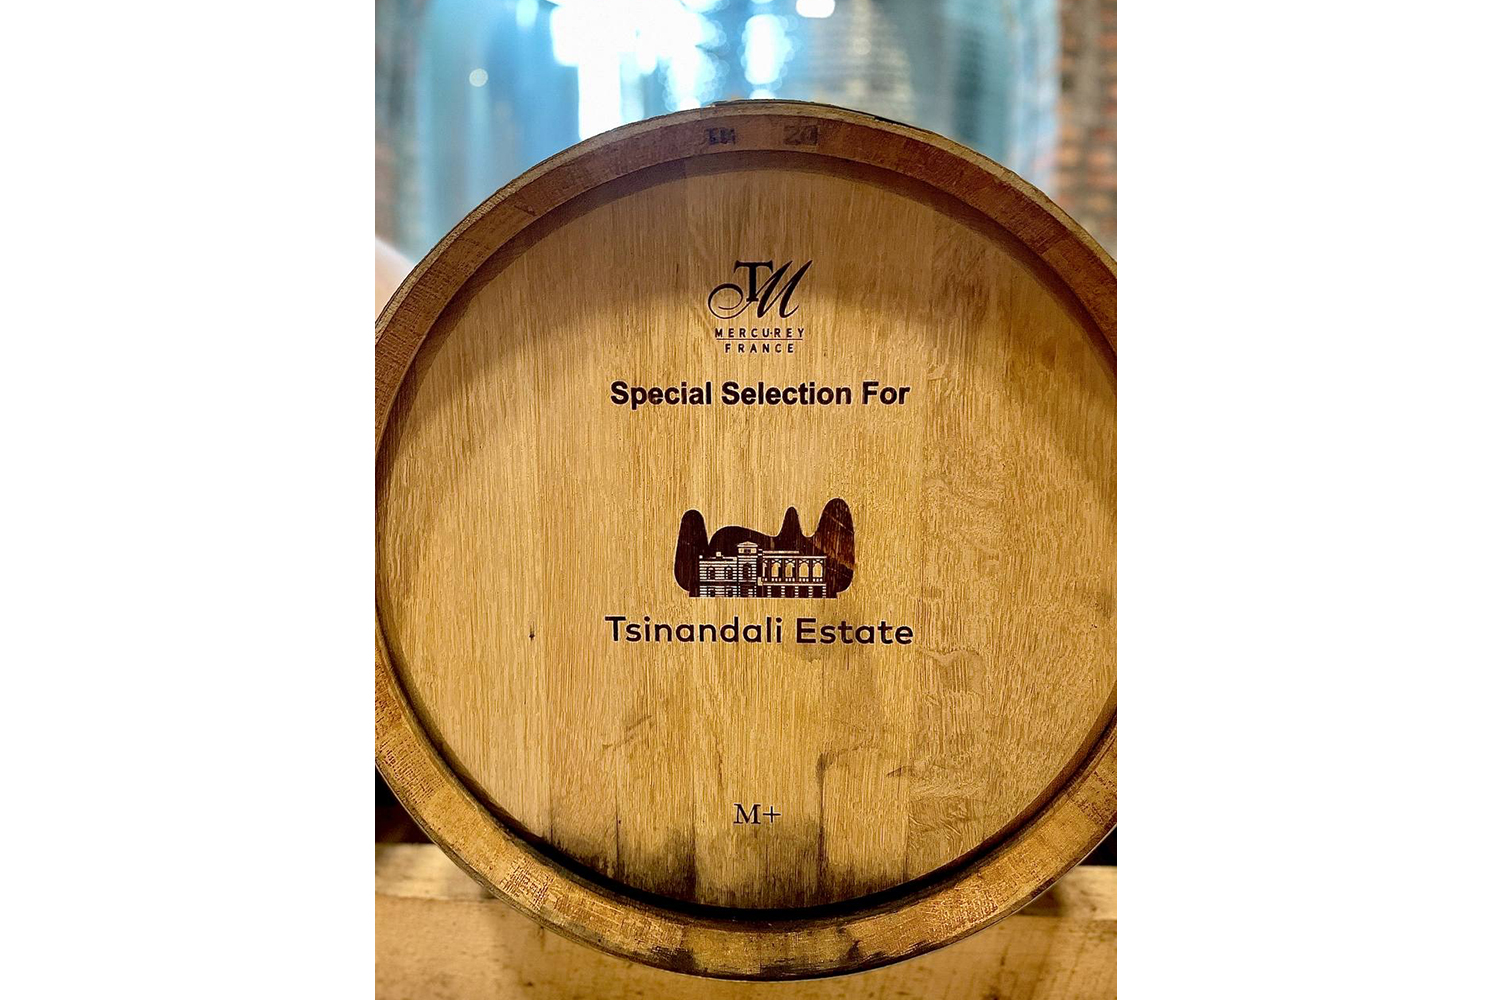 Tsinandali Estate: the vineyards, the birth of wine and enjoying it all in one place